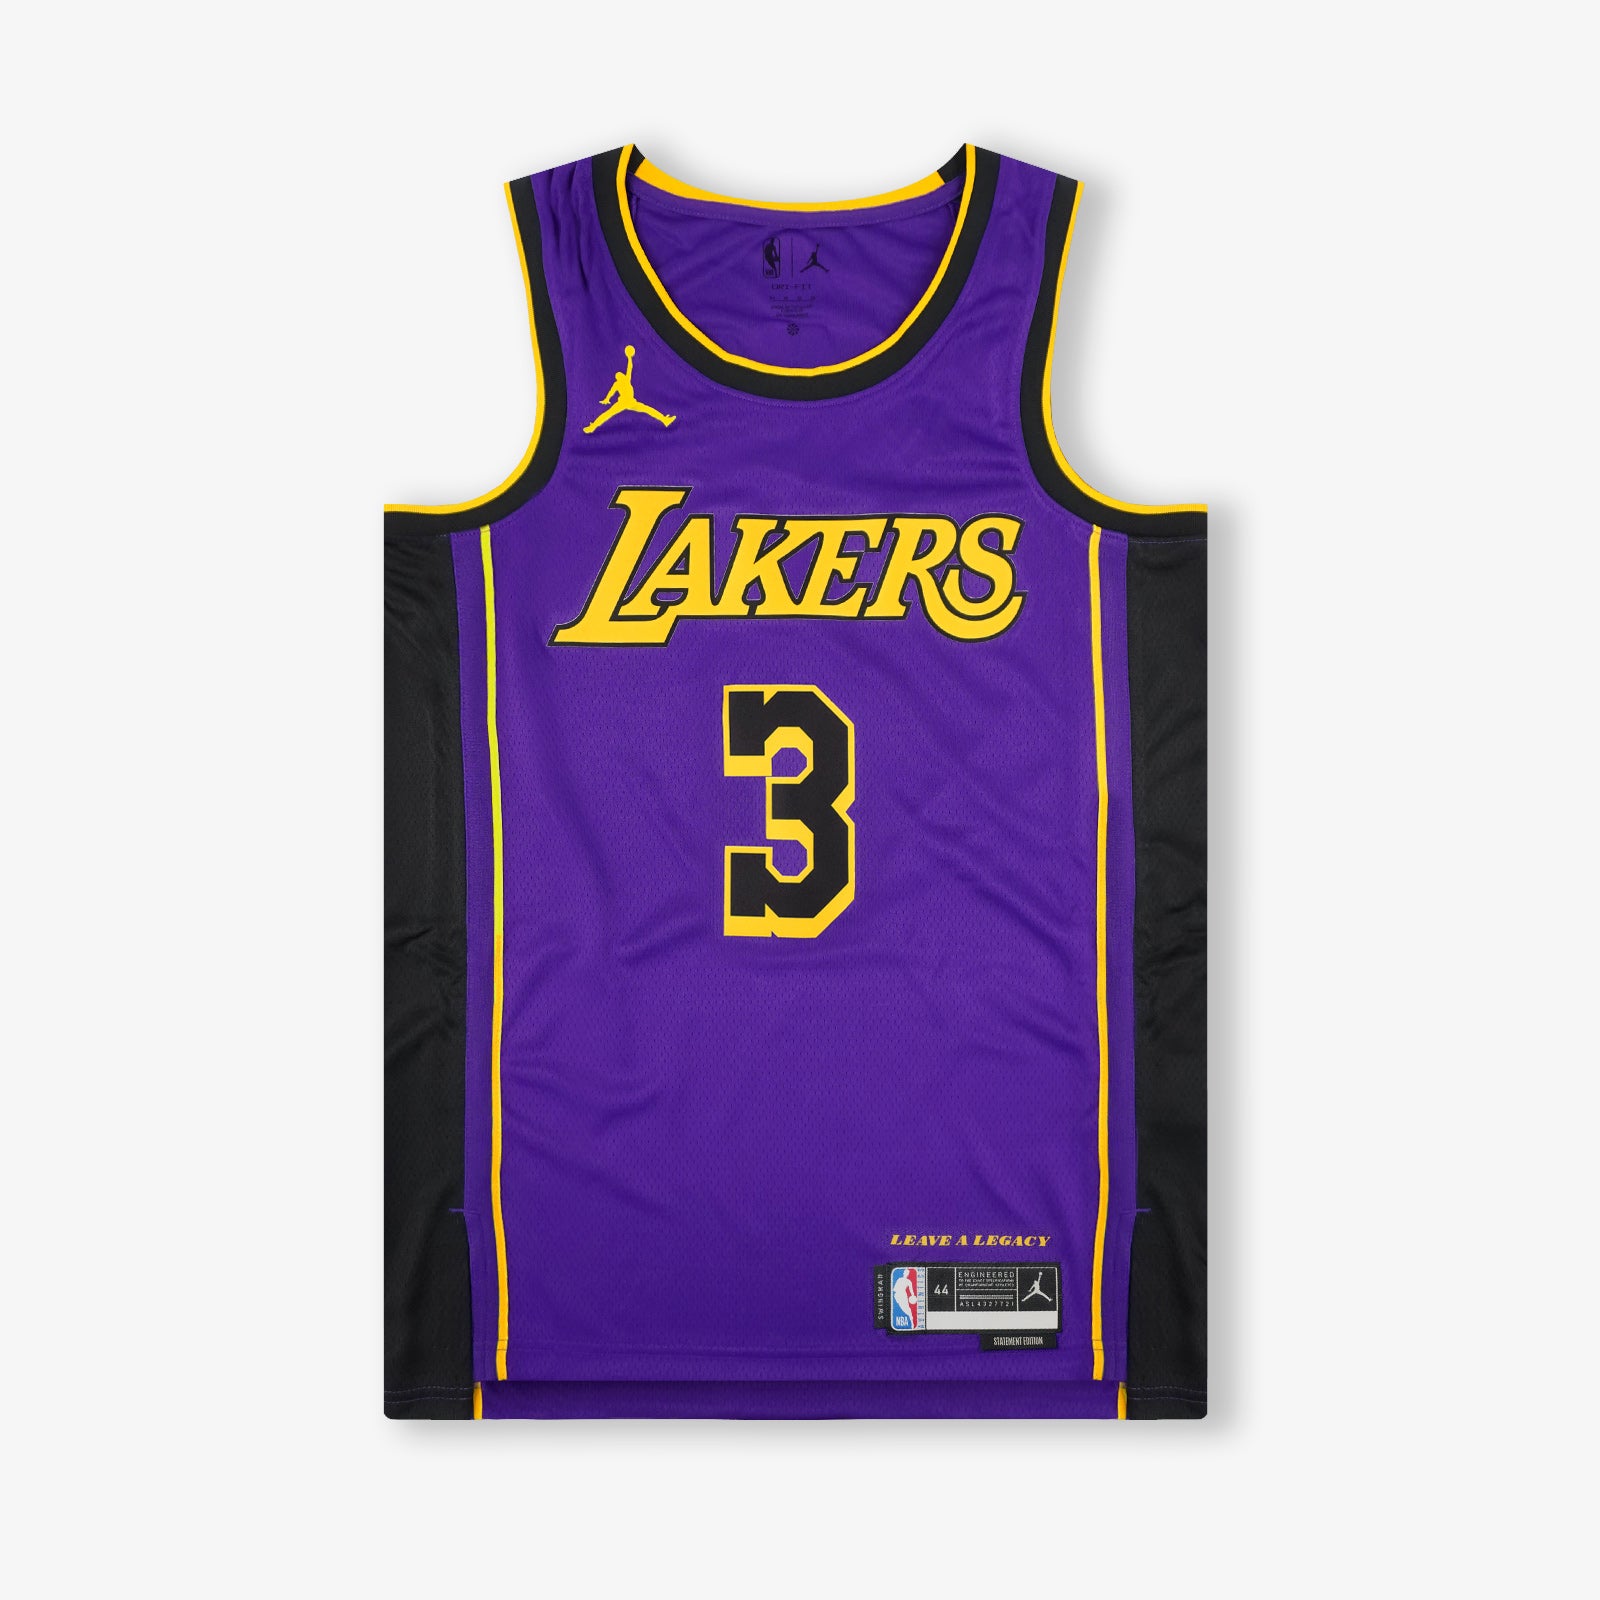 Nike+LeBron+James+Statement+Edition+Jersey for sale online